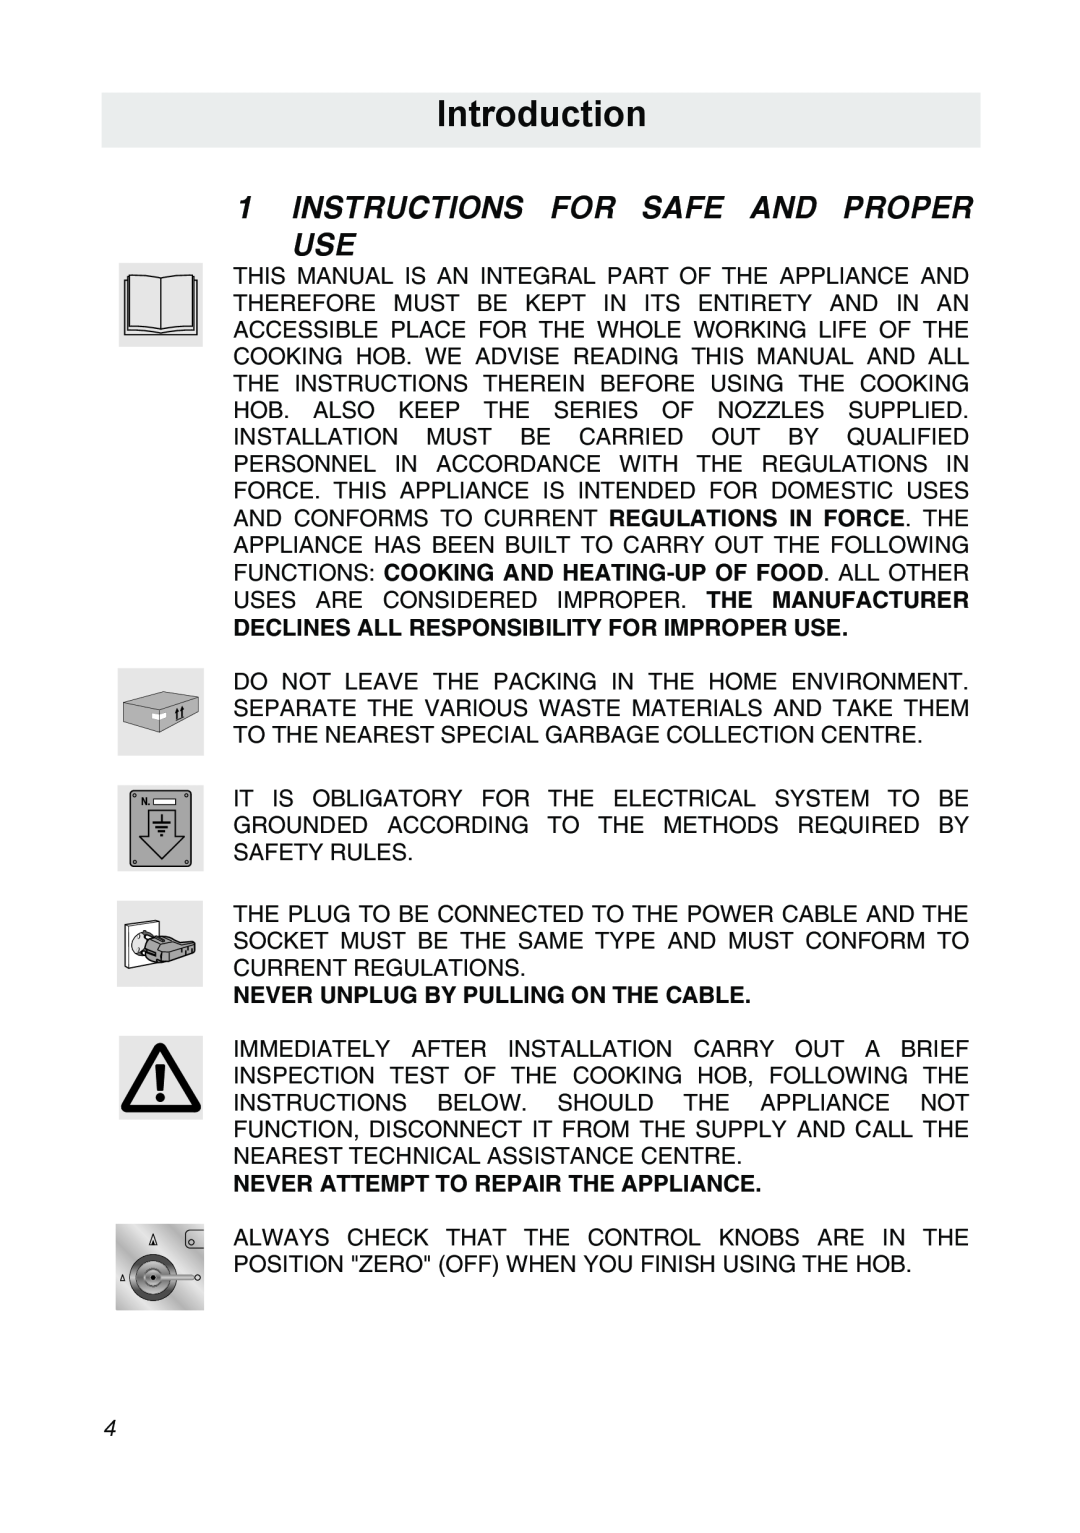 Smeg CIR34XS manual Introduction, Instructions For Safe And Proper Use, Declines All Responsibility For Improper Use 